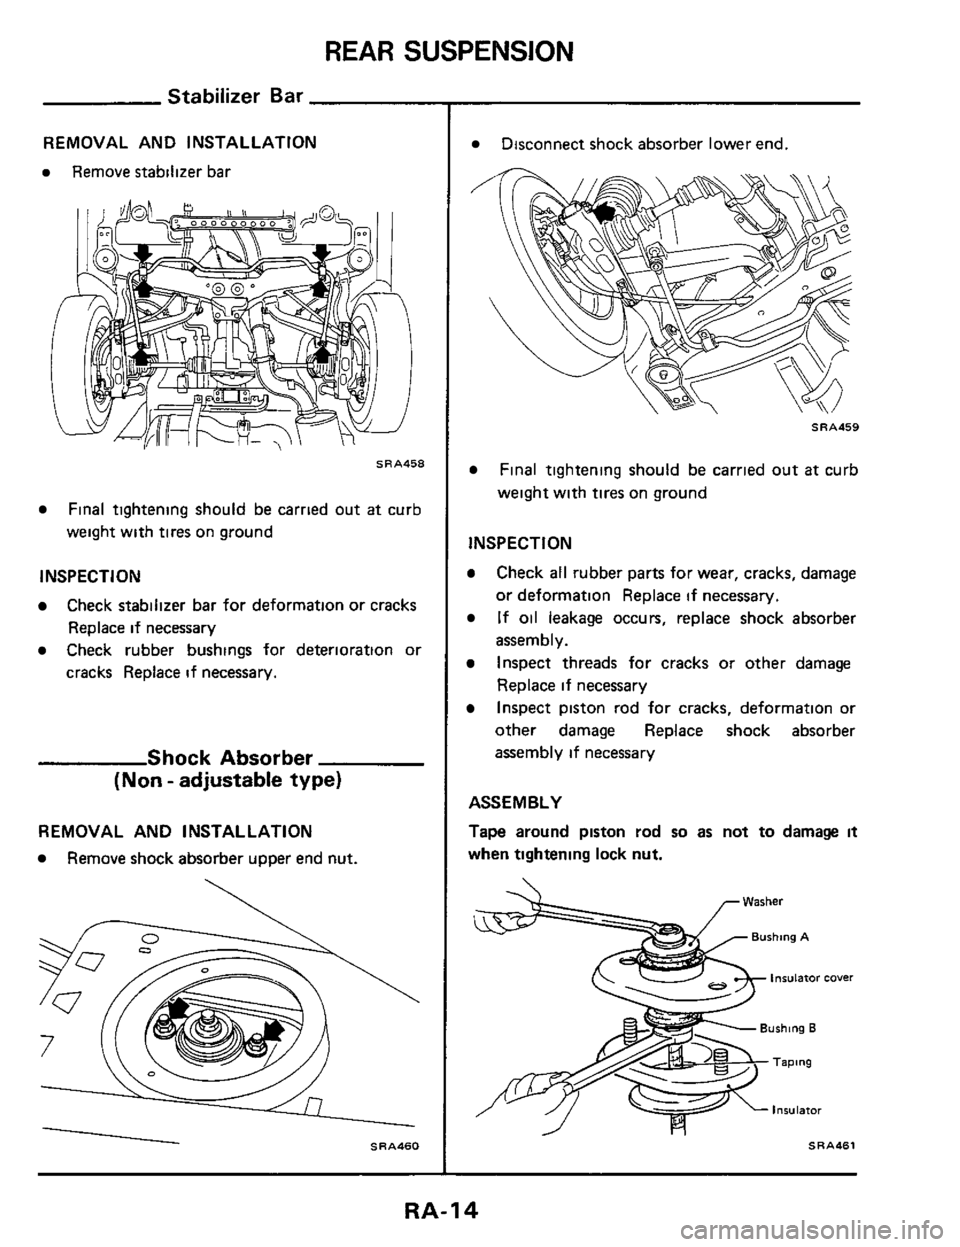 NISSAN 300ZX 1984 Z31 Rear Suspension User Guide REAR SUSPENSION 
Stabilizer Bar 
REMOVAL AND INSTALLATION 
Remove  stabilizer  bar 
SRA458 
Final tightening  should  be carried  out at curb 
weight  with 
tires on ground 
INSPECTION 
Check  stabili